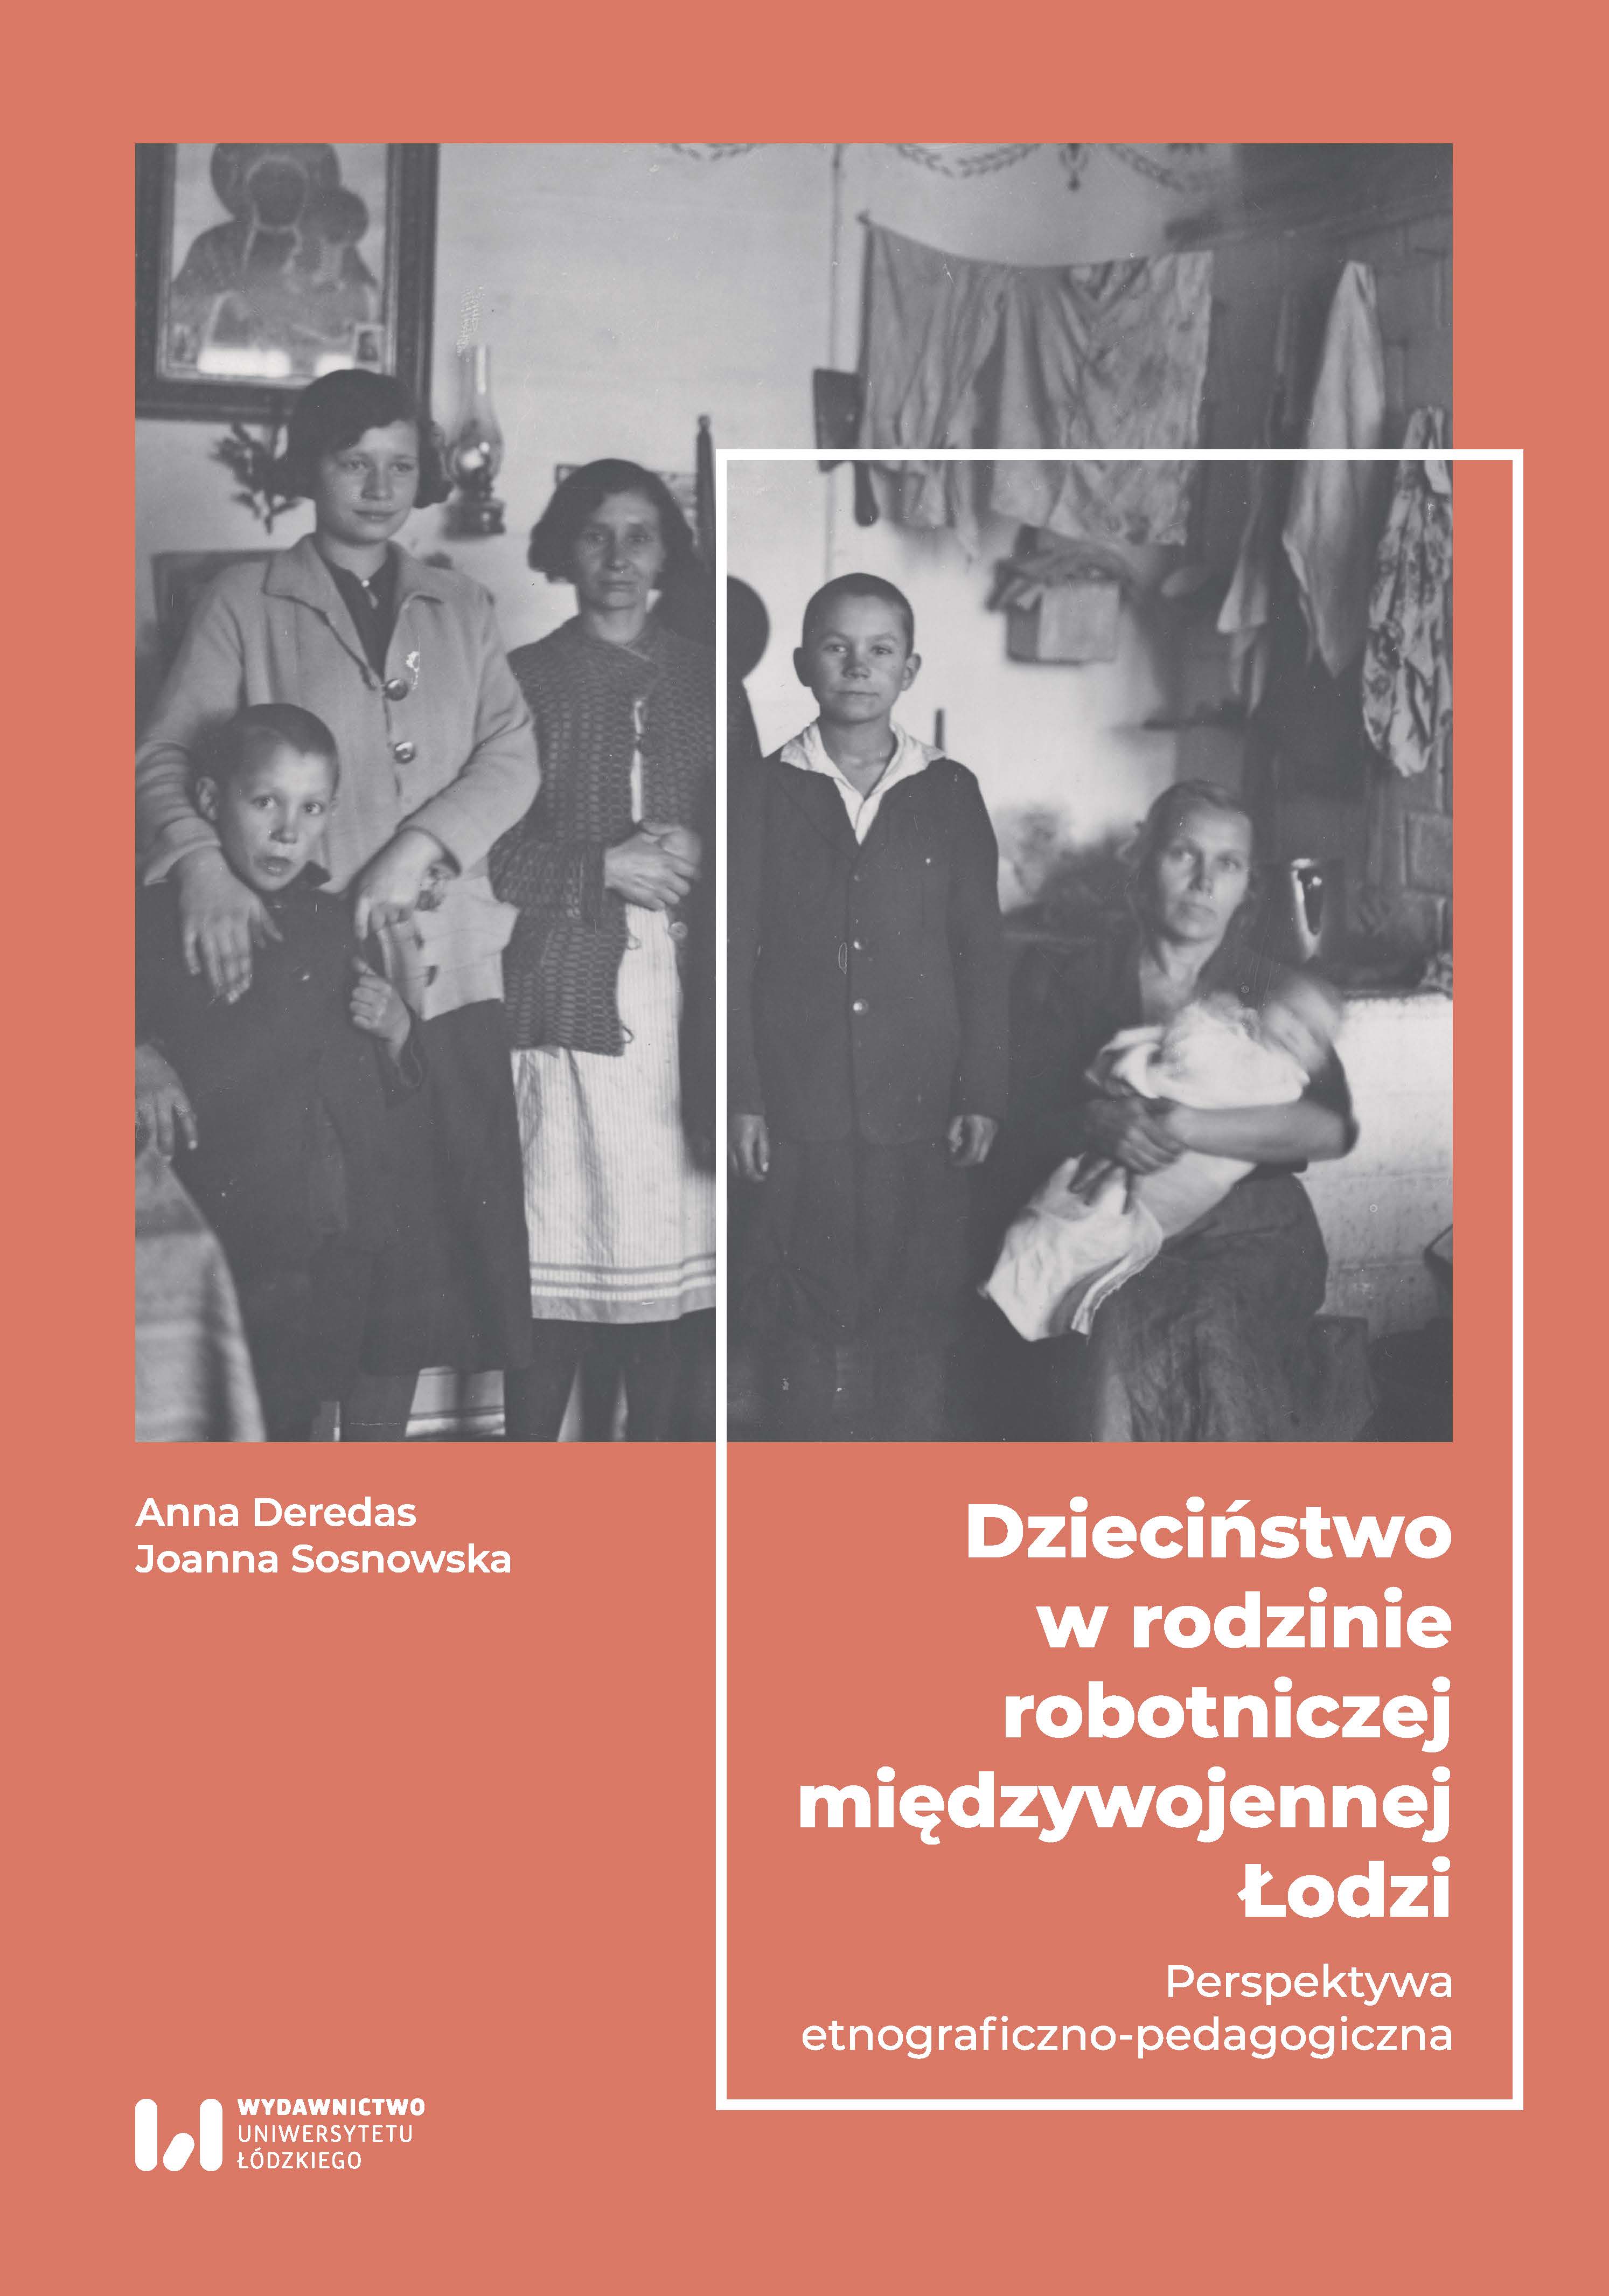 Childhood in a working family in interwar Łódź. An ethnographic and pedagogical perspective